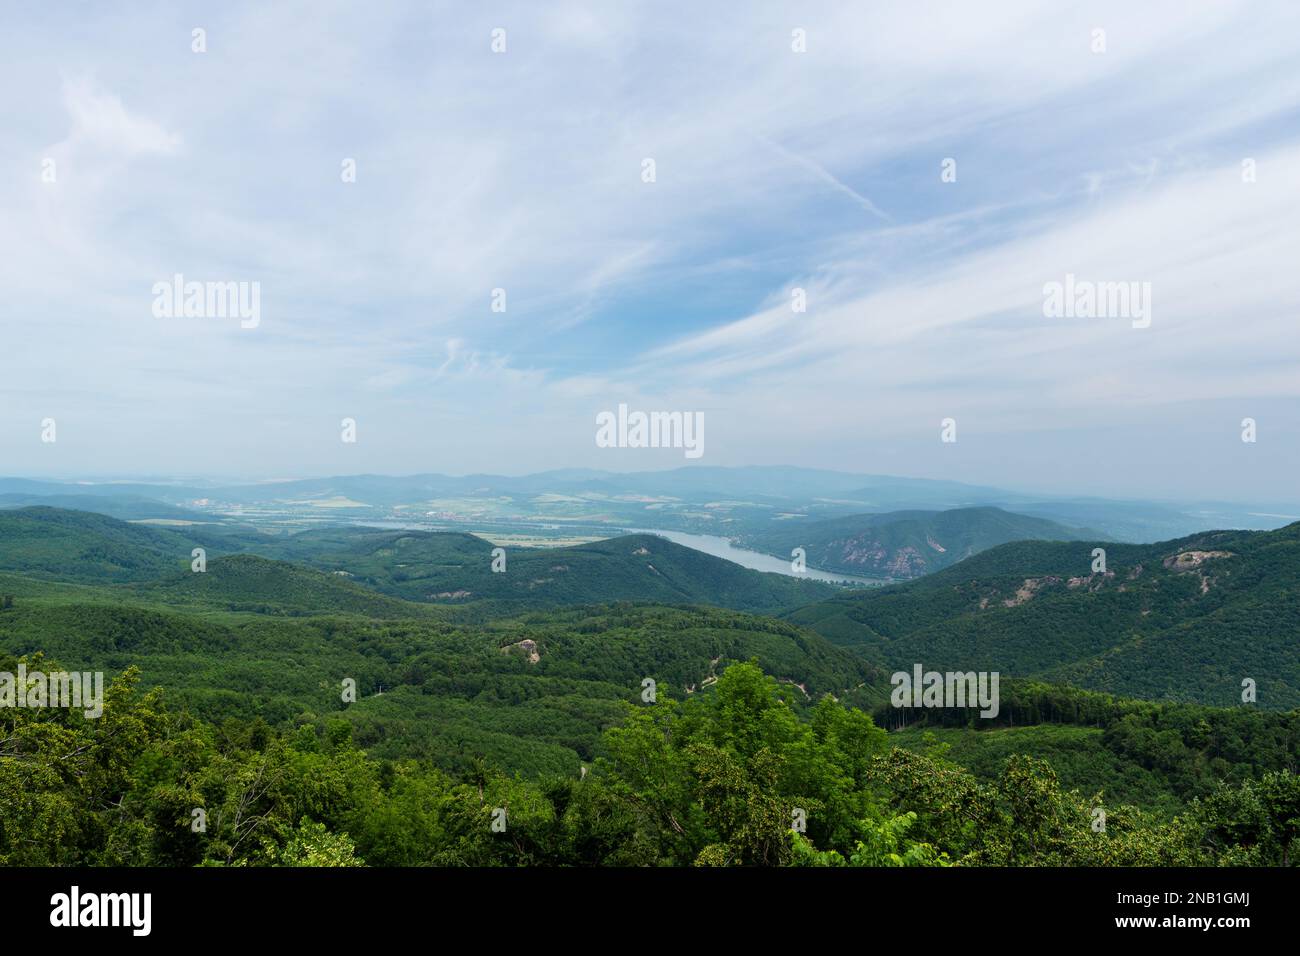 View from Dobogoko in Pilis mountains in Hungary Stock Photo